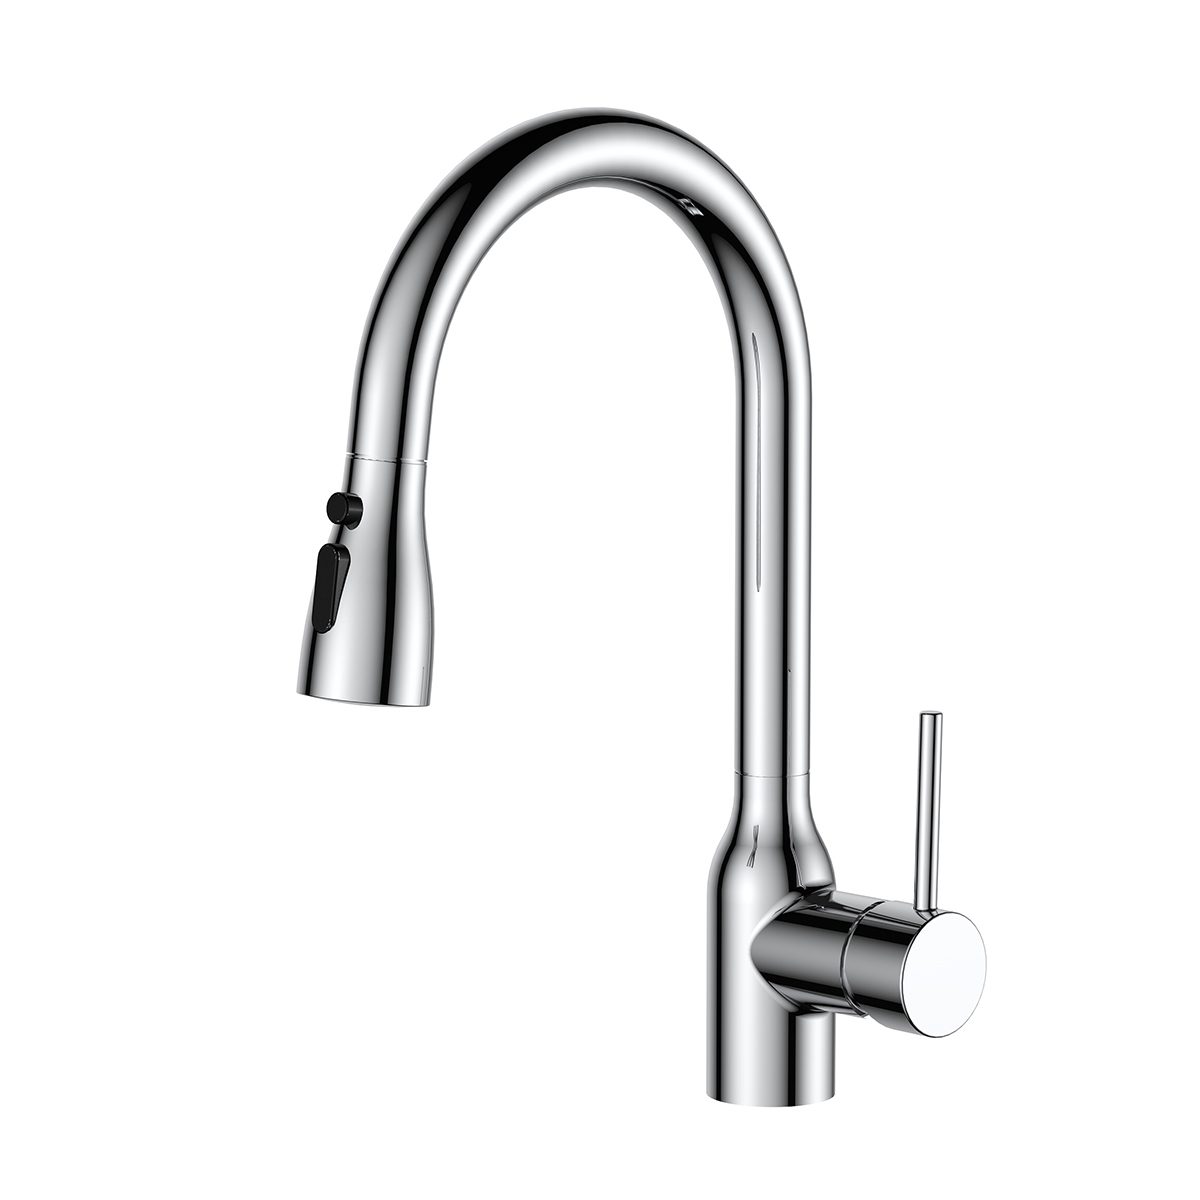 Aquacubic cUPC CEC Sanitary Best Selling Pull Down Kitchen Faucet AF3056-5